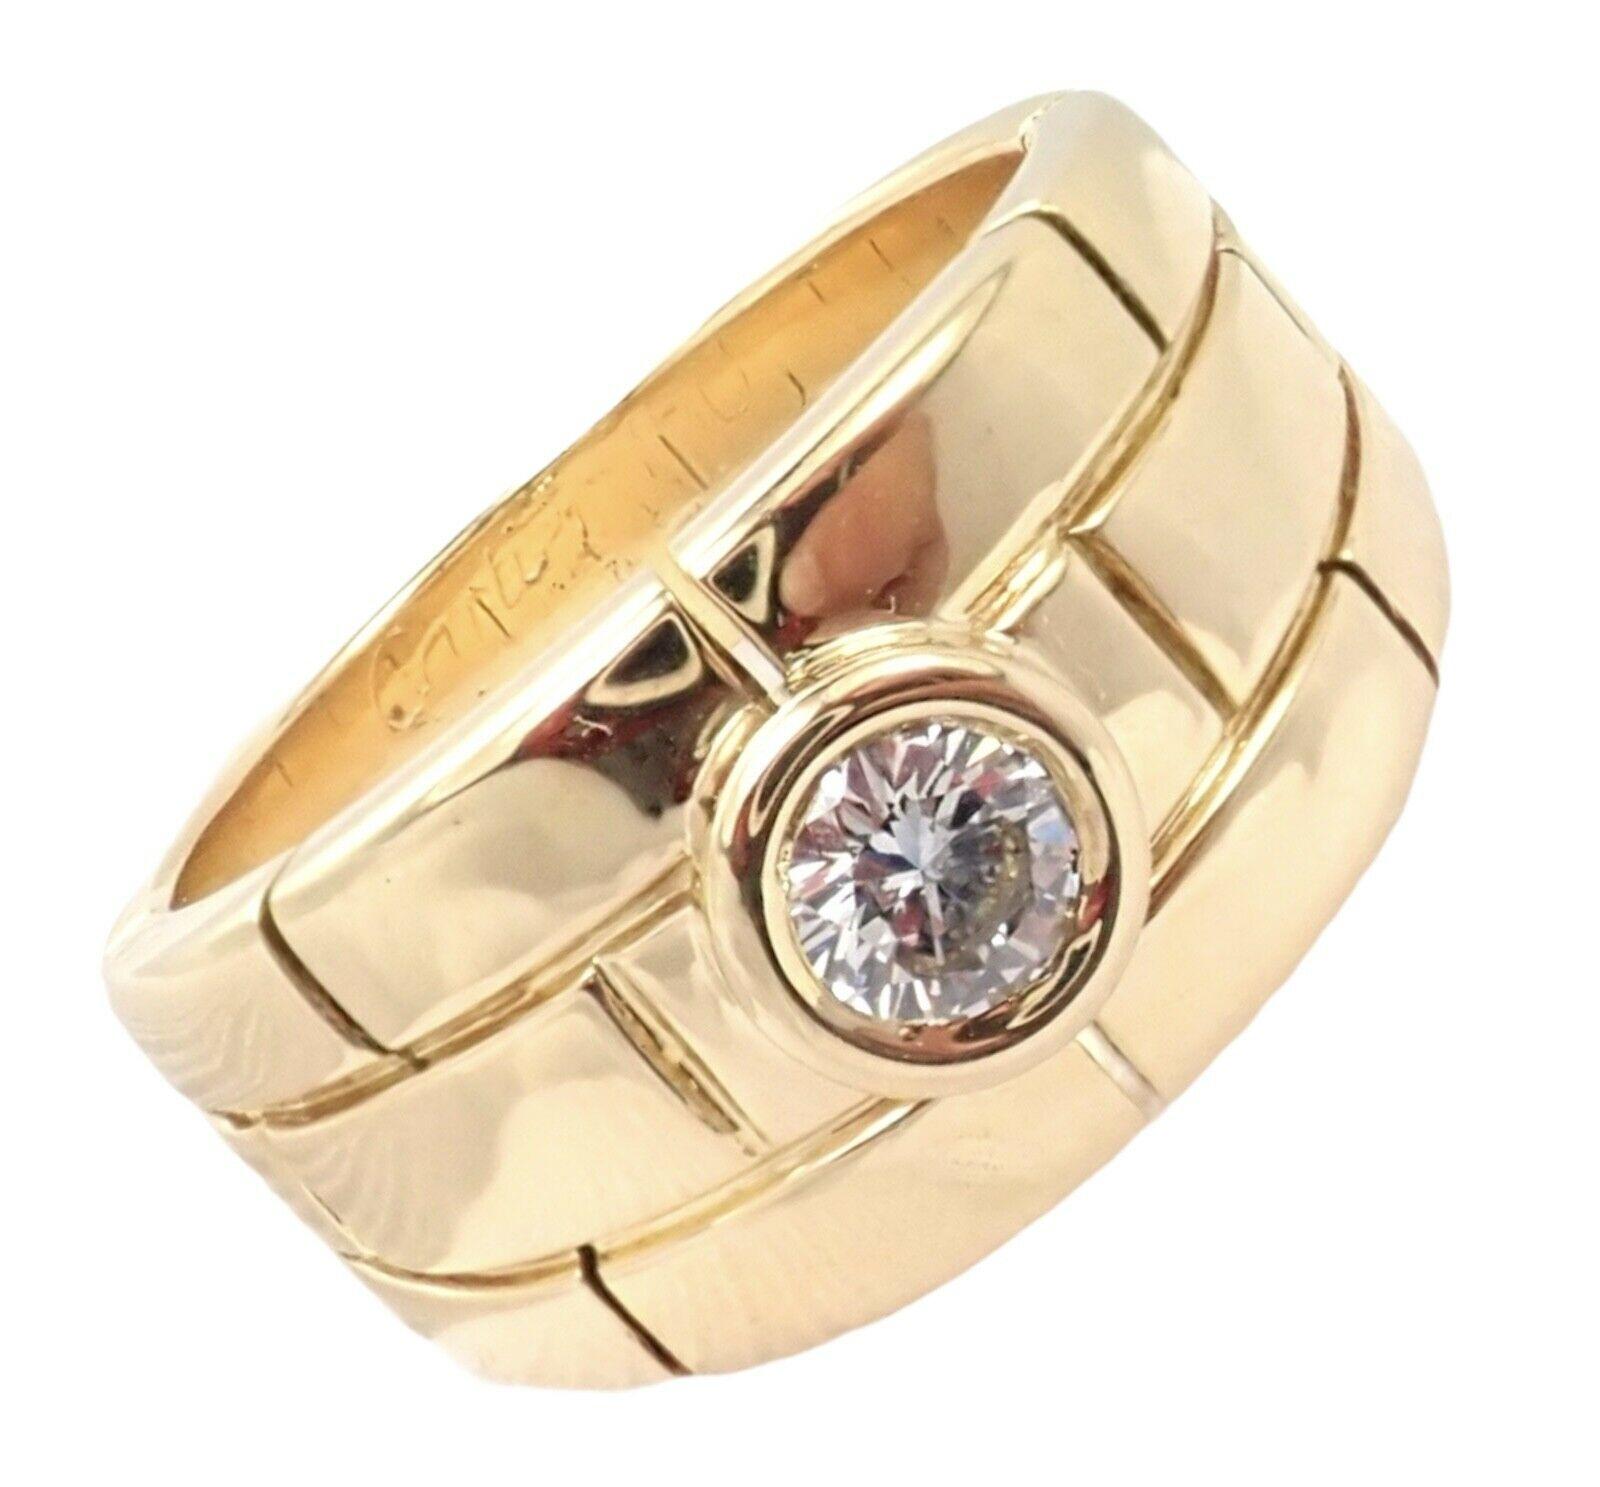 18k Yellow Gold Maillon Panthere Solitare Diamond Band Ring by Cartier.
With 1 round brilliant cut diamond VS1 clarity, G color. Weight: 0.28ct. 
Details:
Size: 5 3/4, European 51
Weight: 9.9 grams
Diamond: Diamond is VS1 clarity, G color total